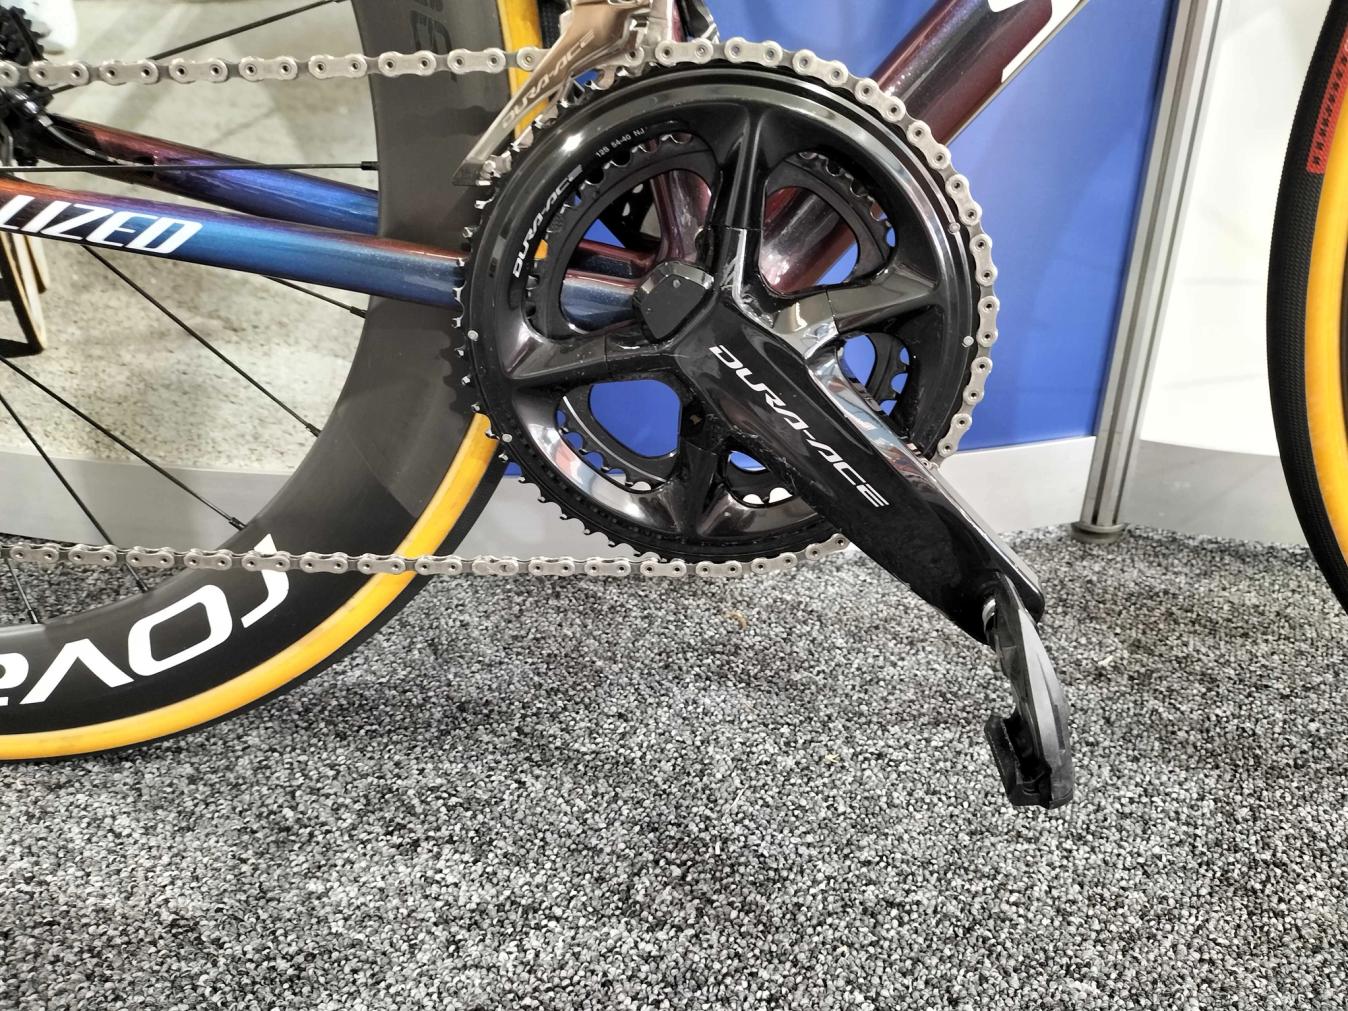 The Dura-Ace chainset has a built-in power meter